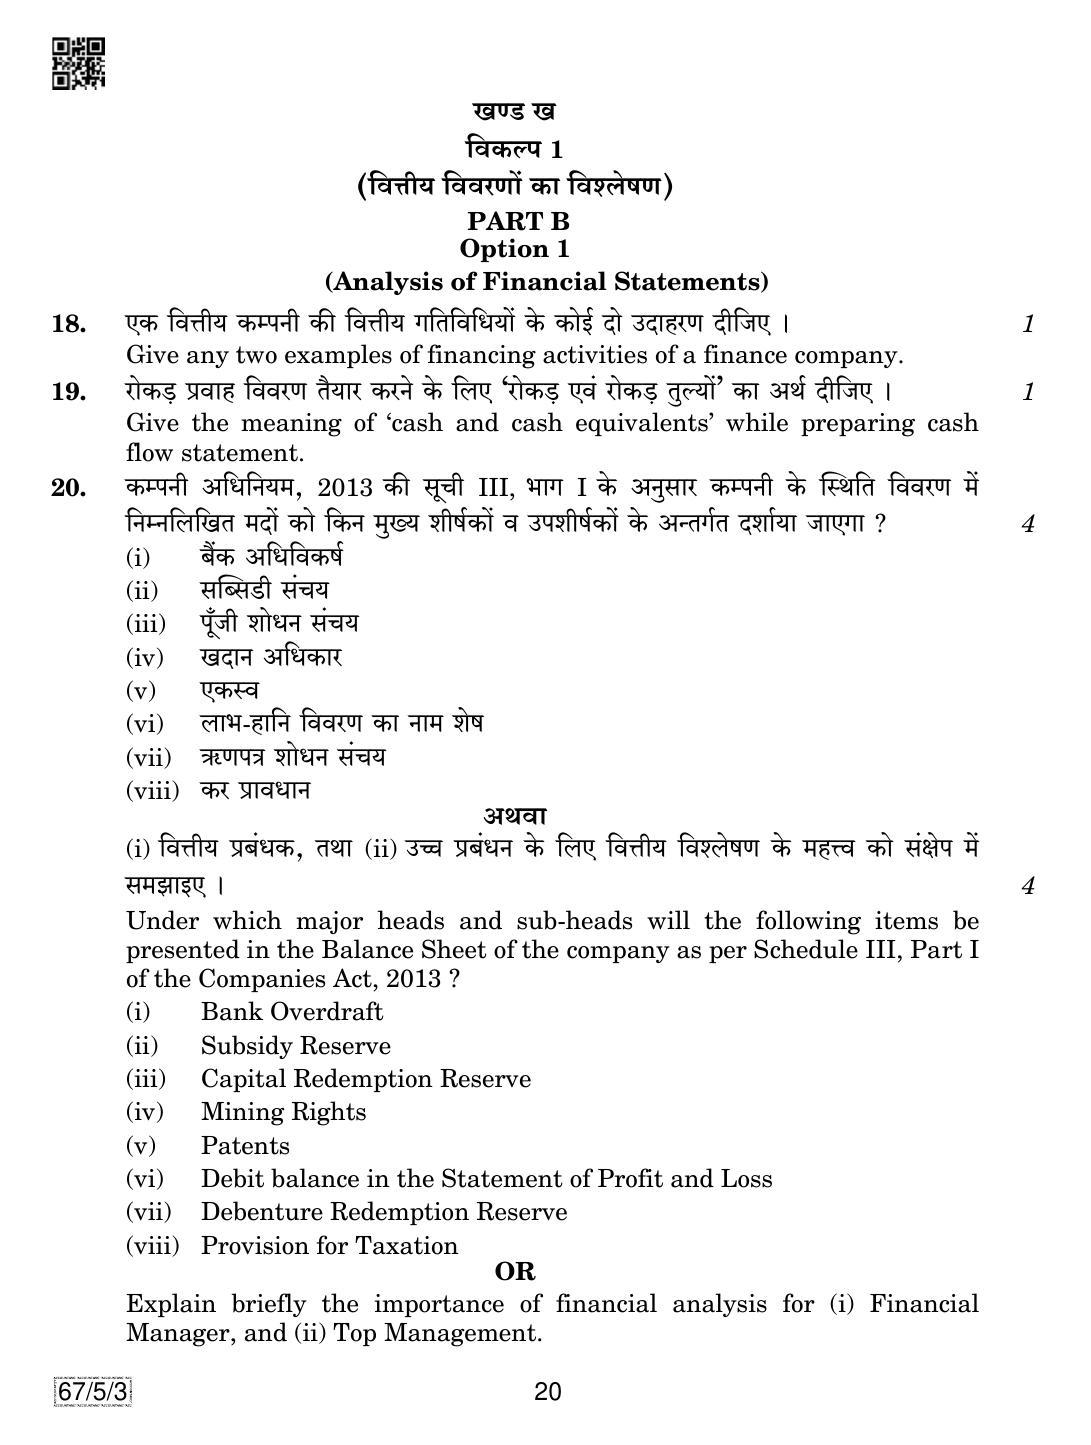 CBSE Class 12 67-5-3 Accountancy 2019 Question Paper - Page 20